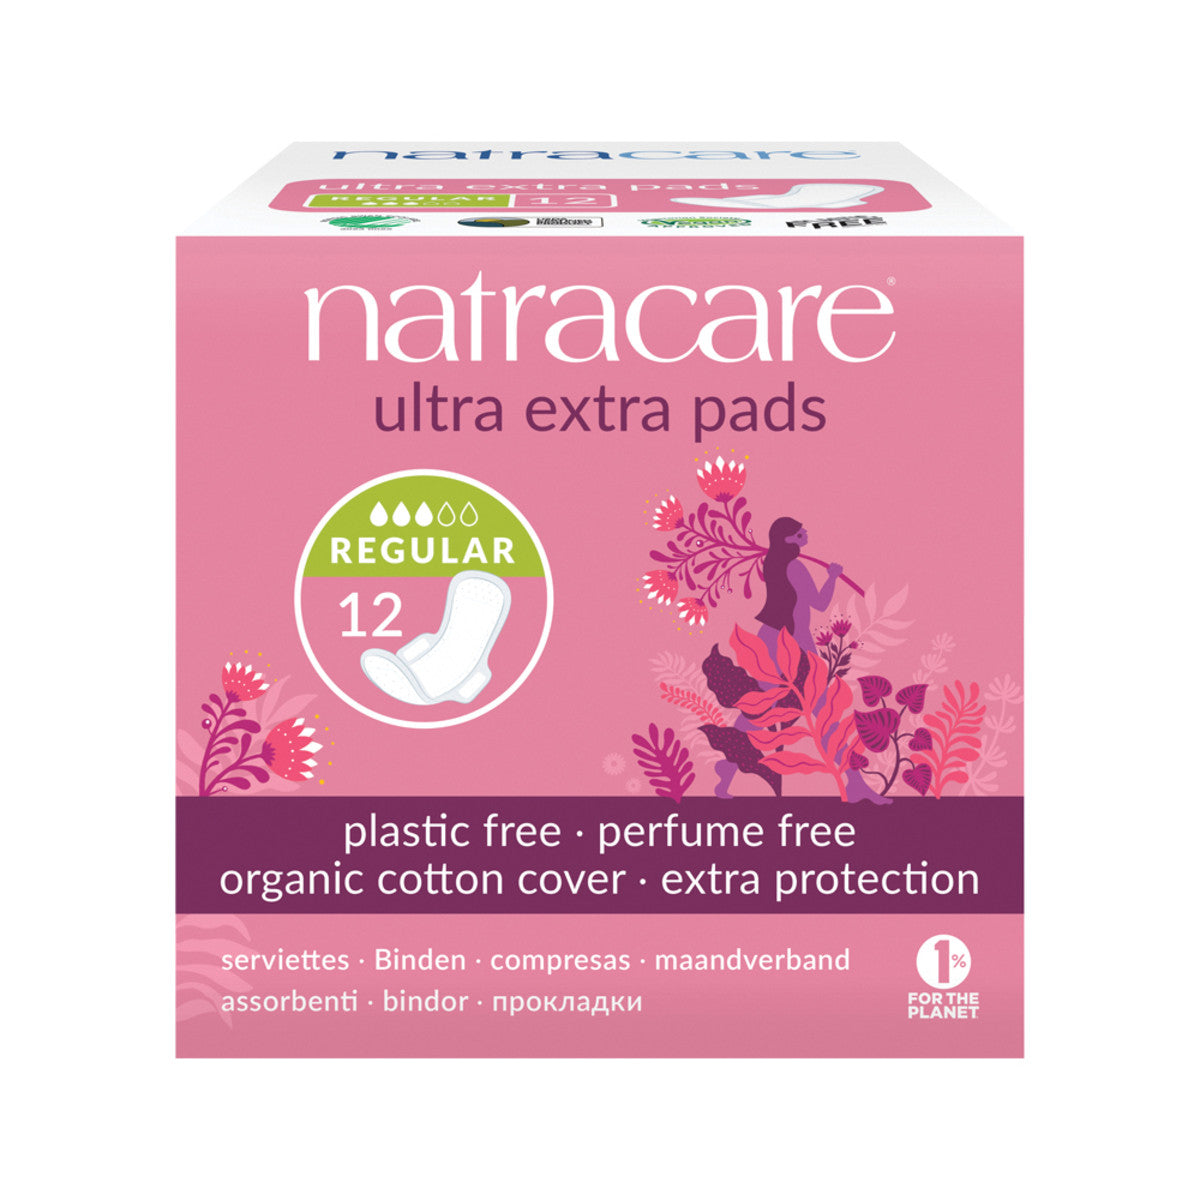 Natracare - Ultra Extra Pads Normal with Organic Cotton Cover